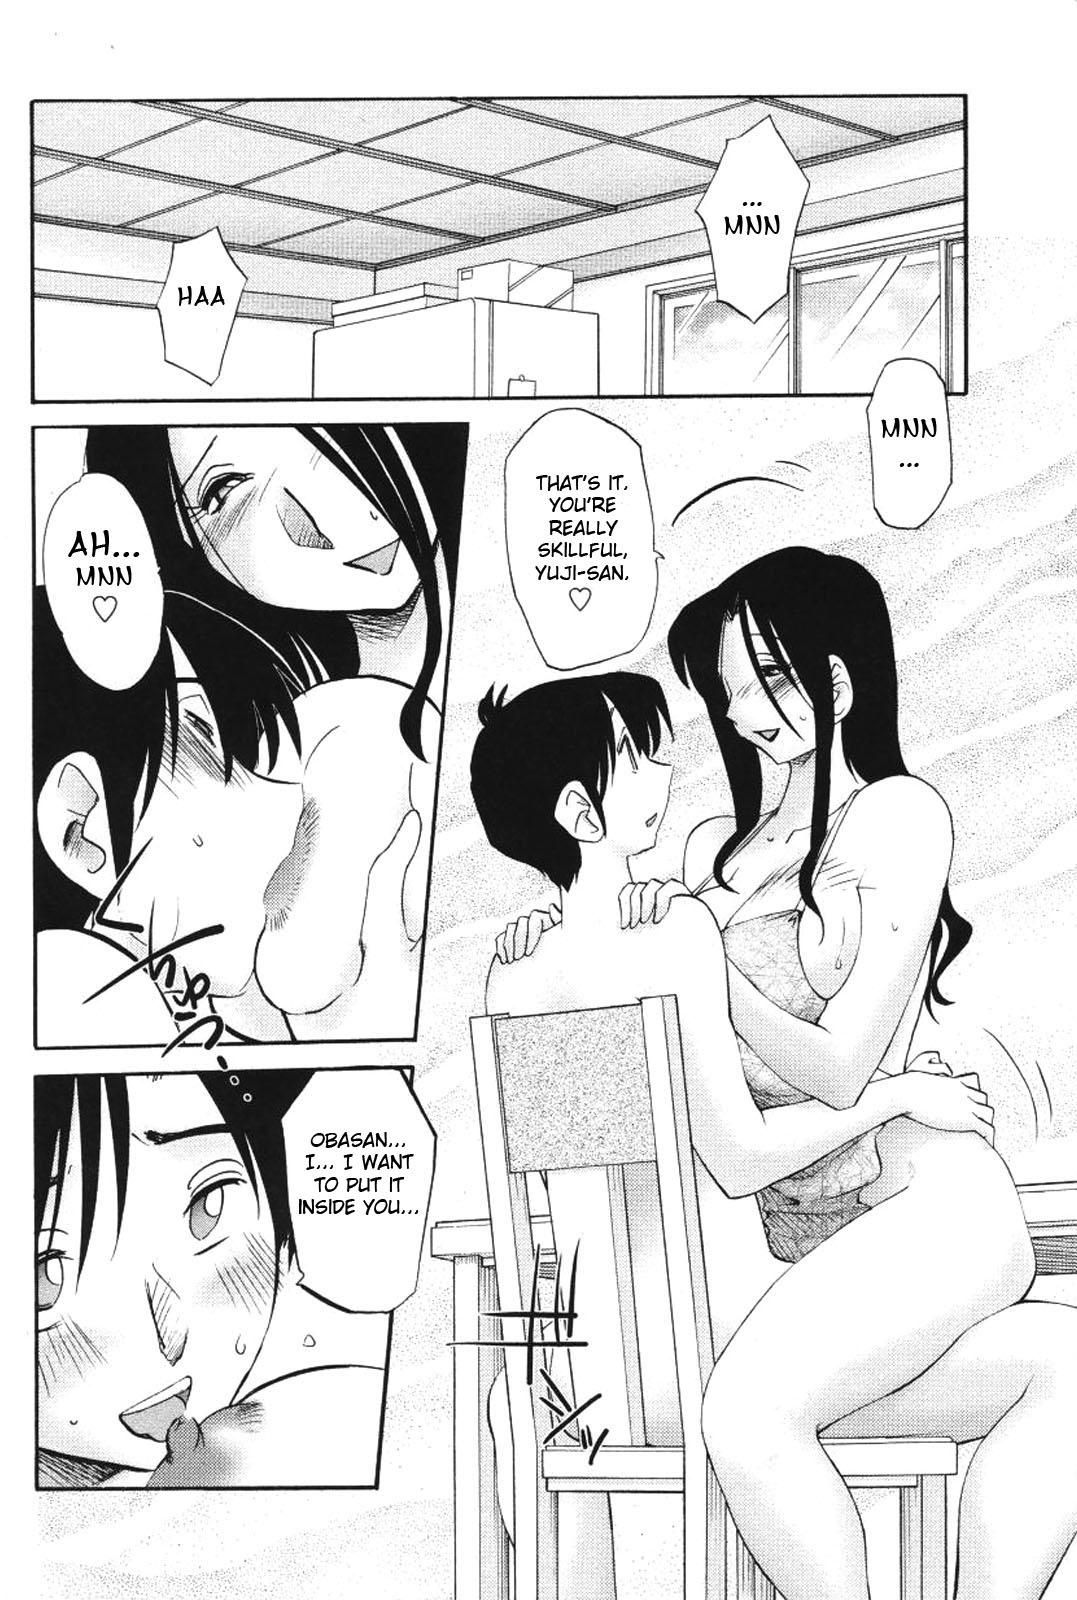 My Sister is My Wife Chapter 12 (English) Translated by Fated Cricle 7